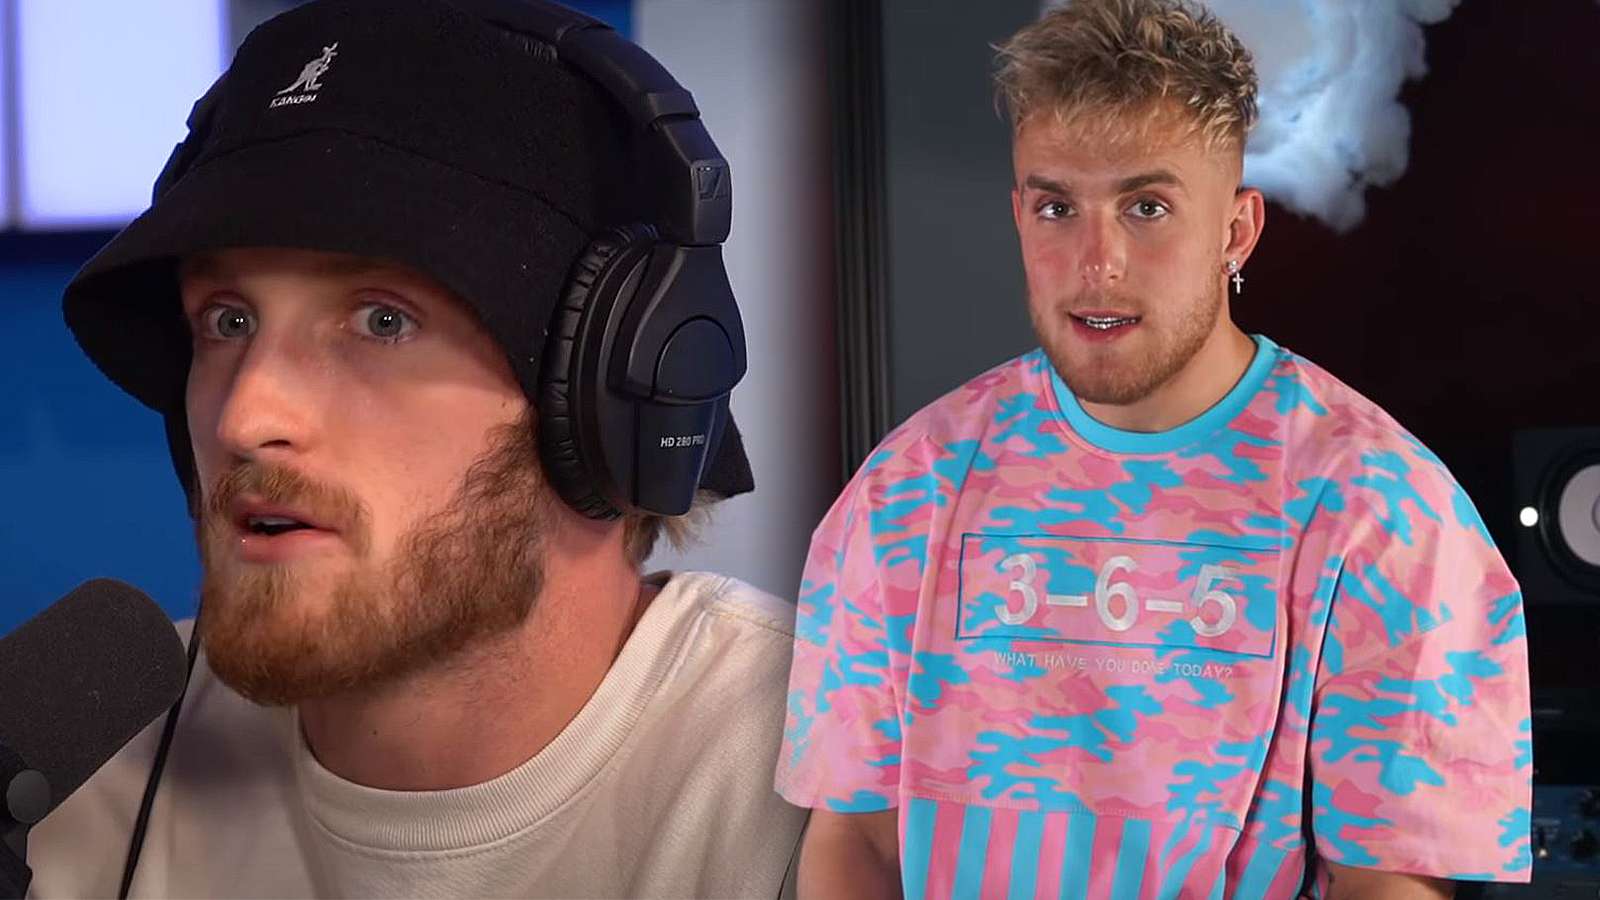 Logan Paul and Jake Paul talk to the audience.